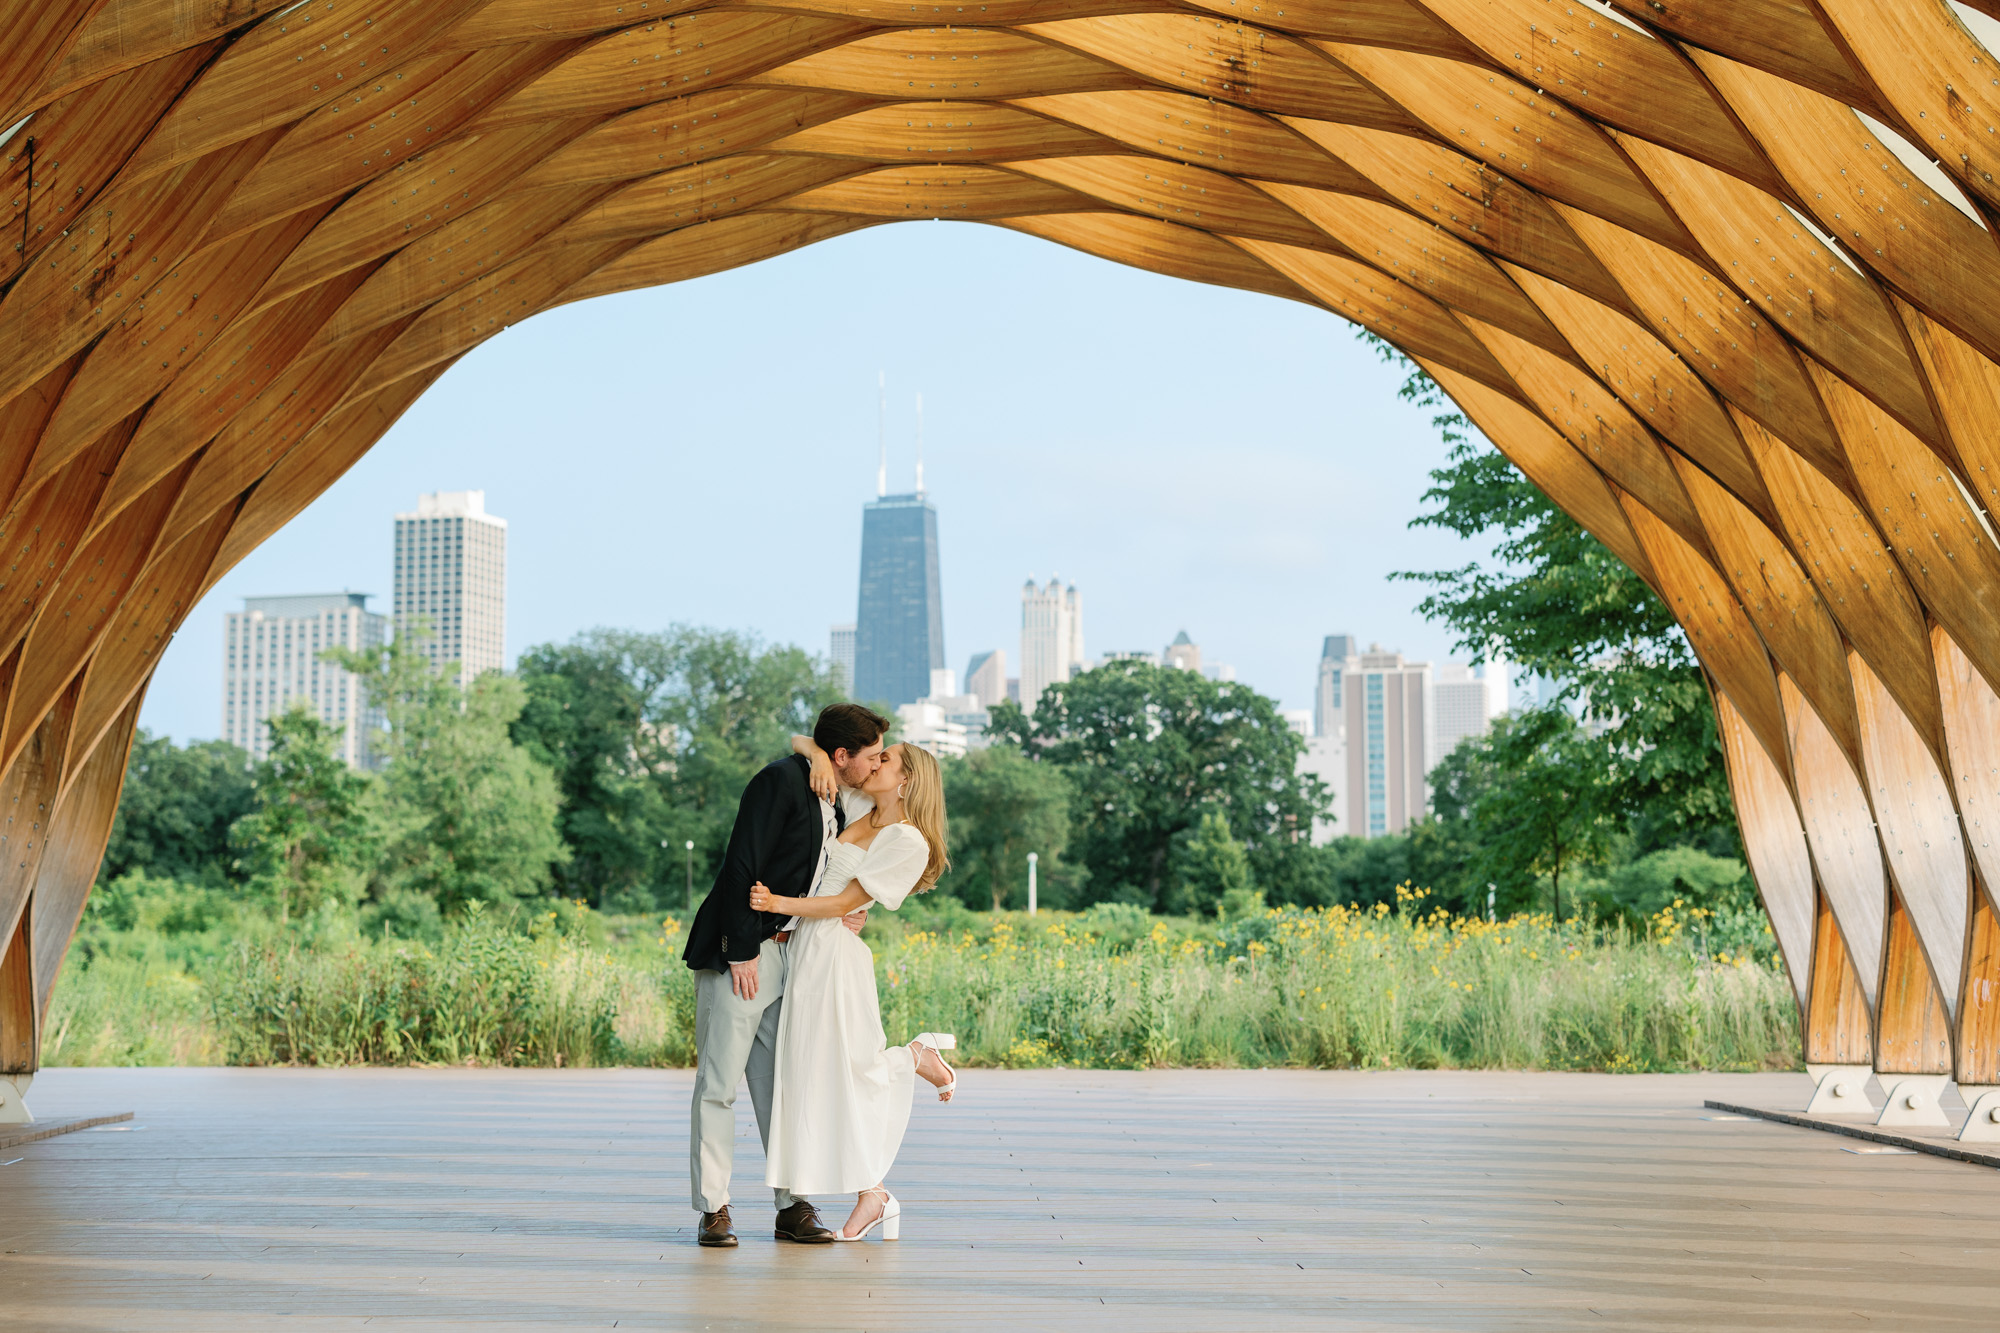 An engagement photo taken at Lincoln Park's Honeycomb.